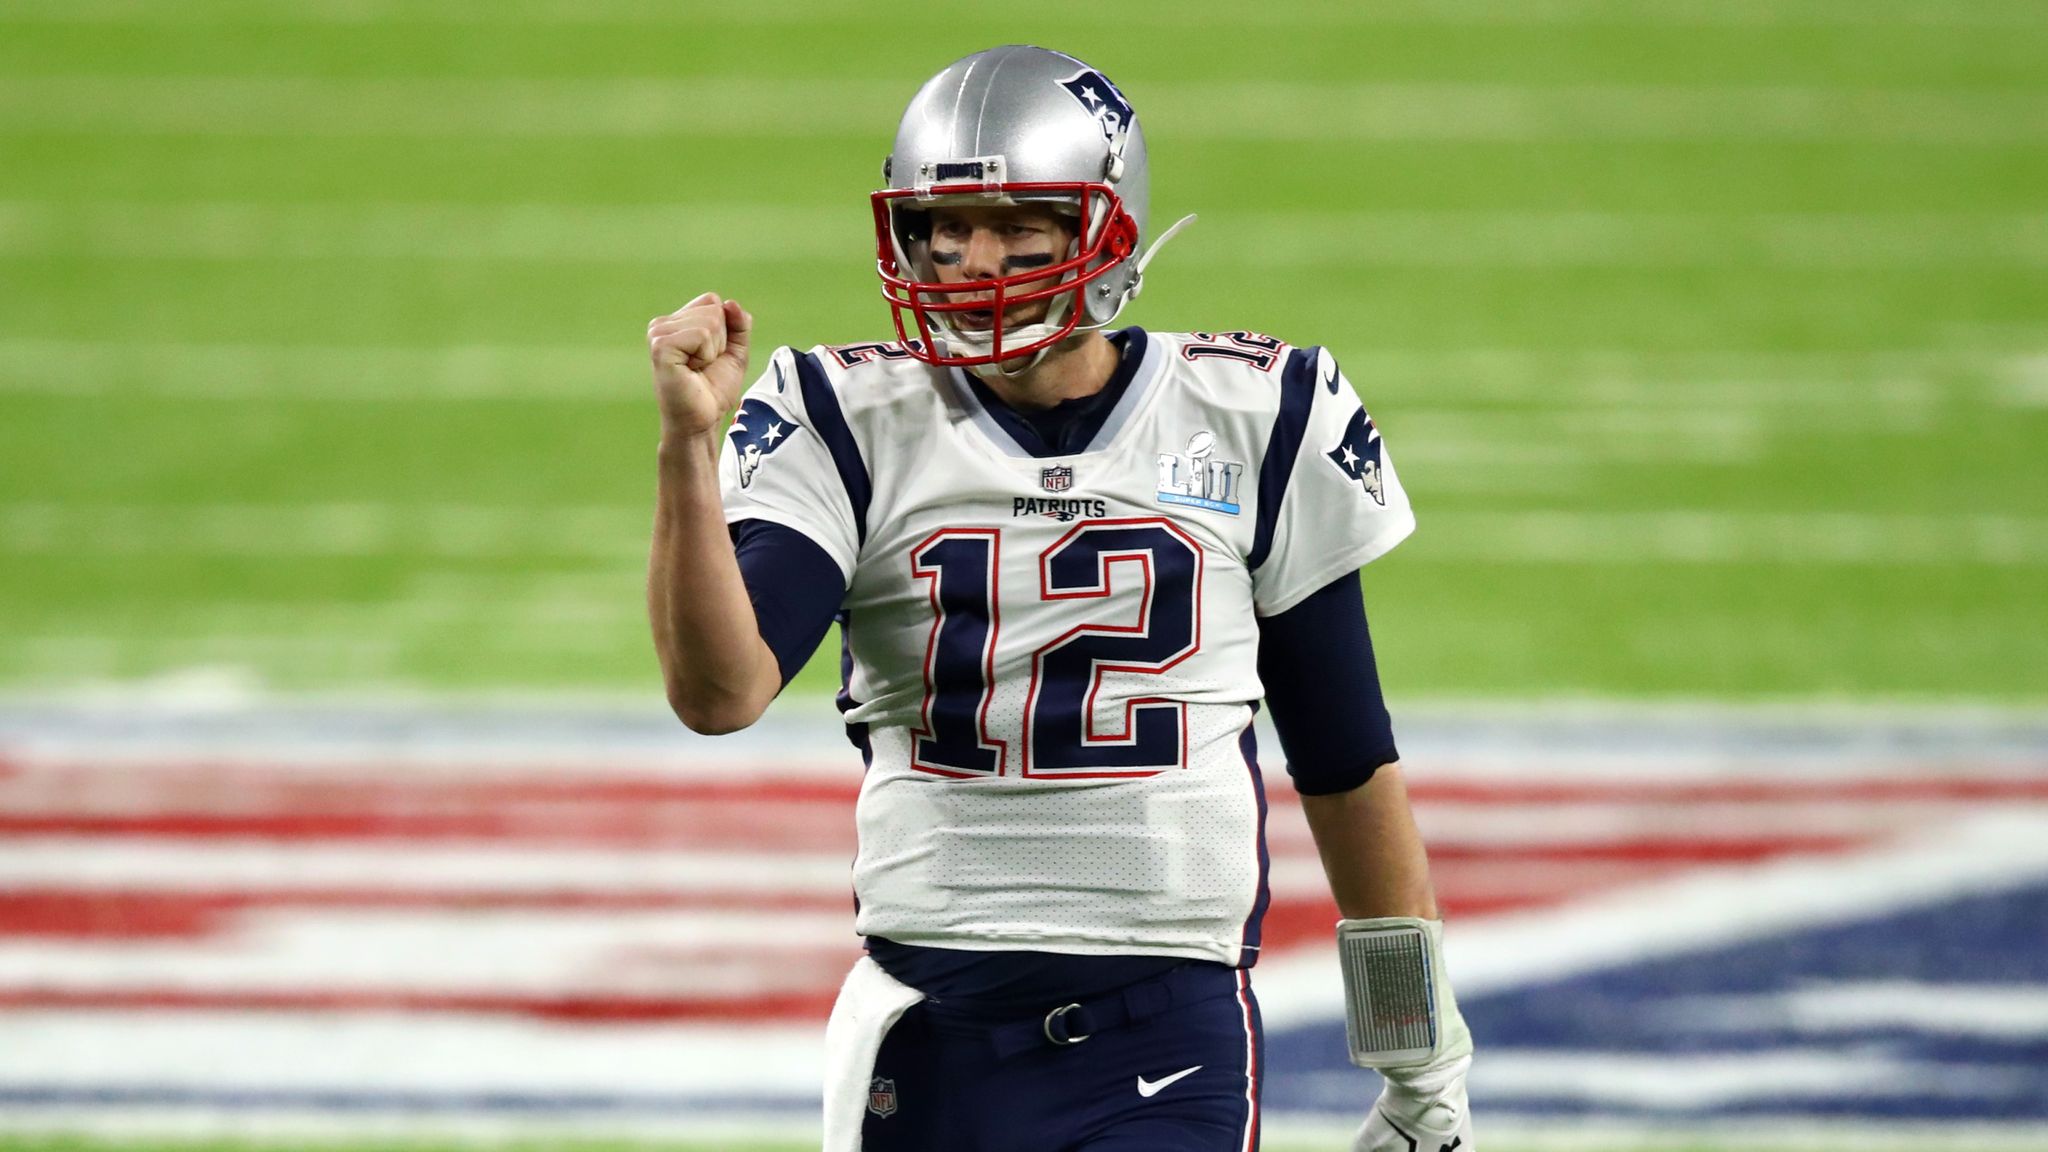 Tom Brady named No 1 in NFL Top 100 for second year running, NFL News